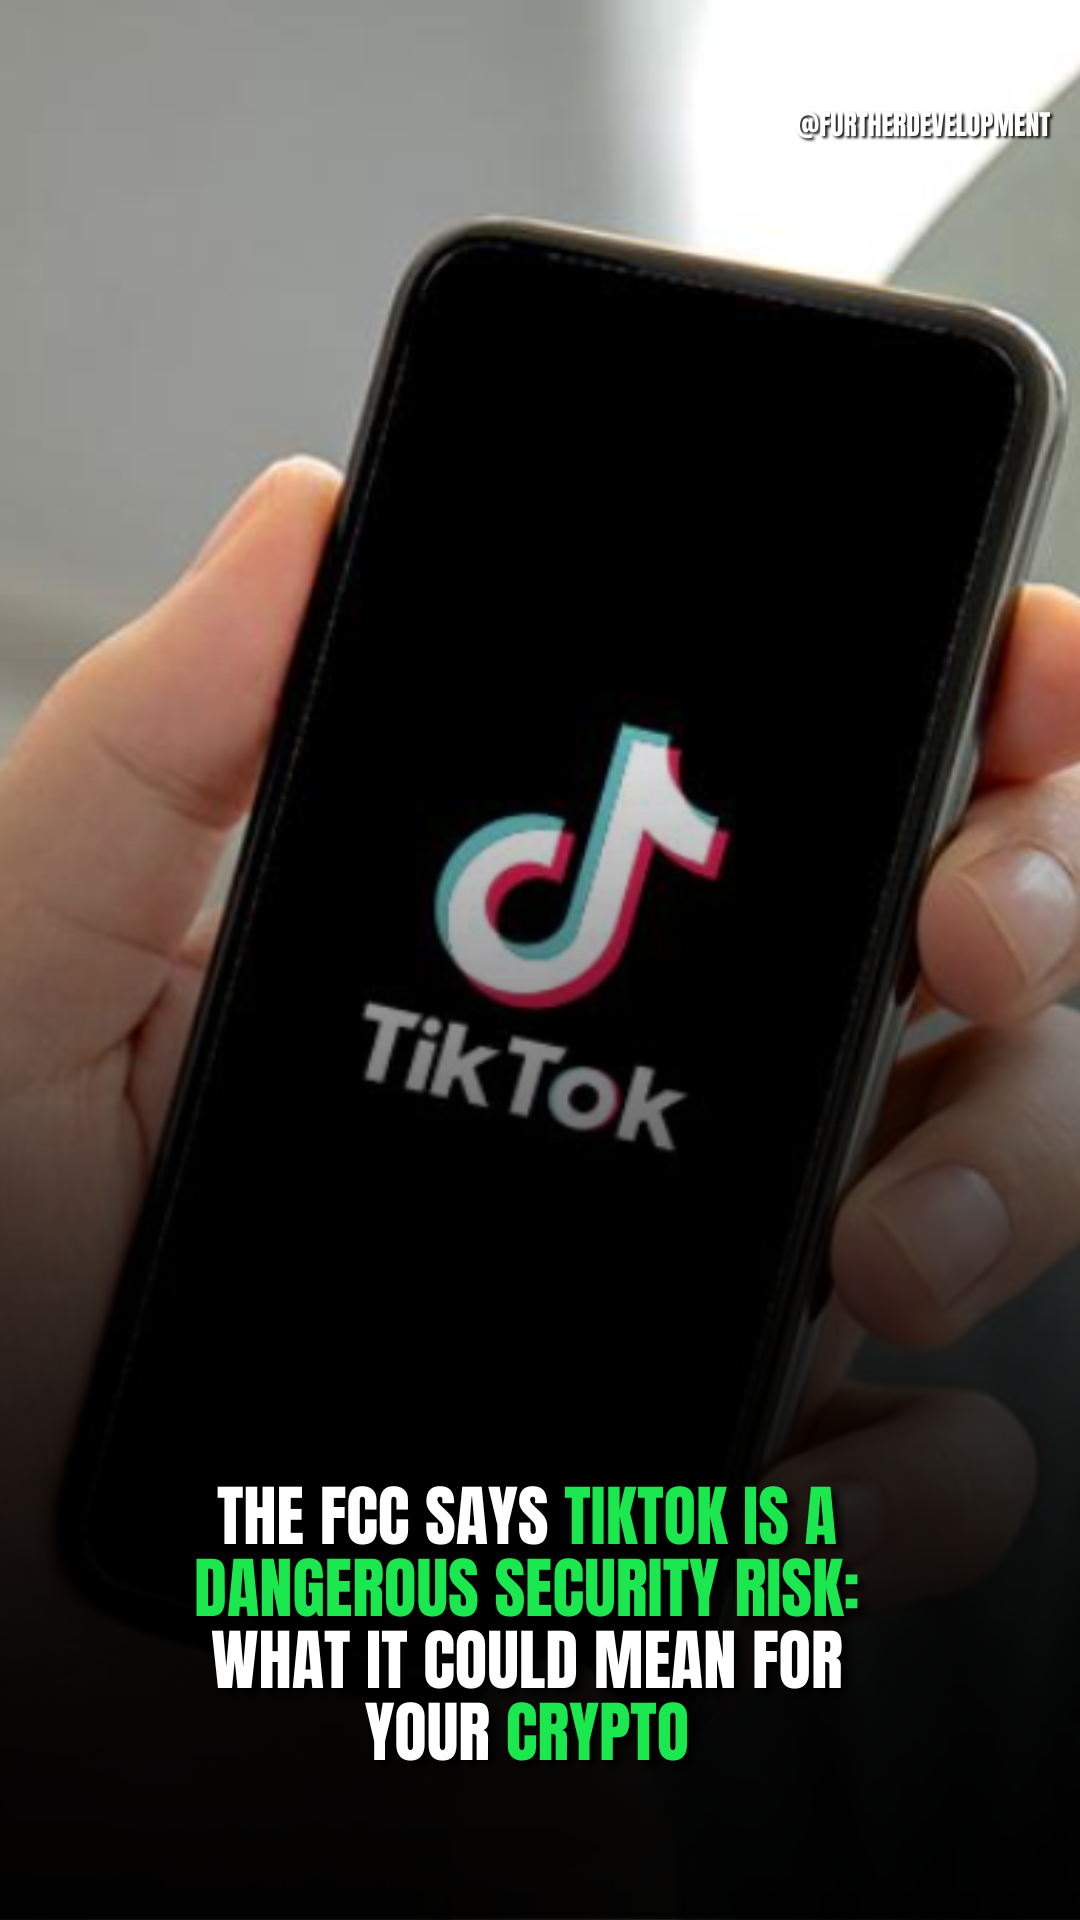 THE FCC SAYS TIKTOK IS A DANGEROUS SECURITY RISK: WHAT IT COULD MEAN FOR YOUR CRYPTO